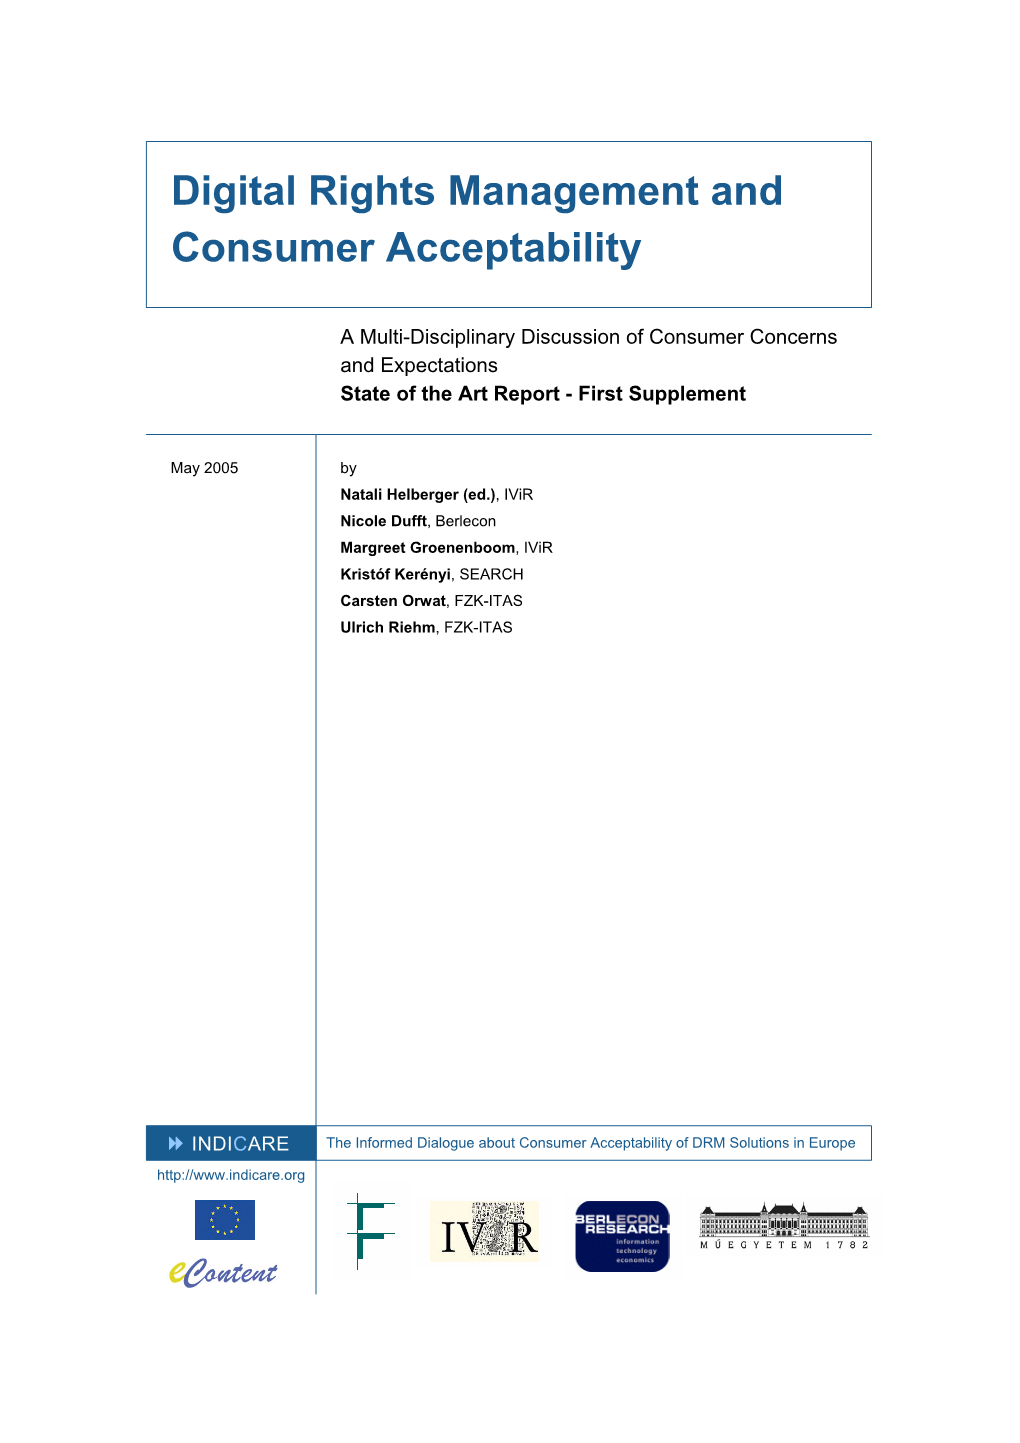 Digital Rights Management and Consumer Acceptability